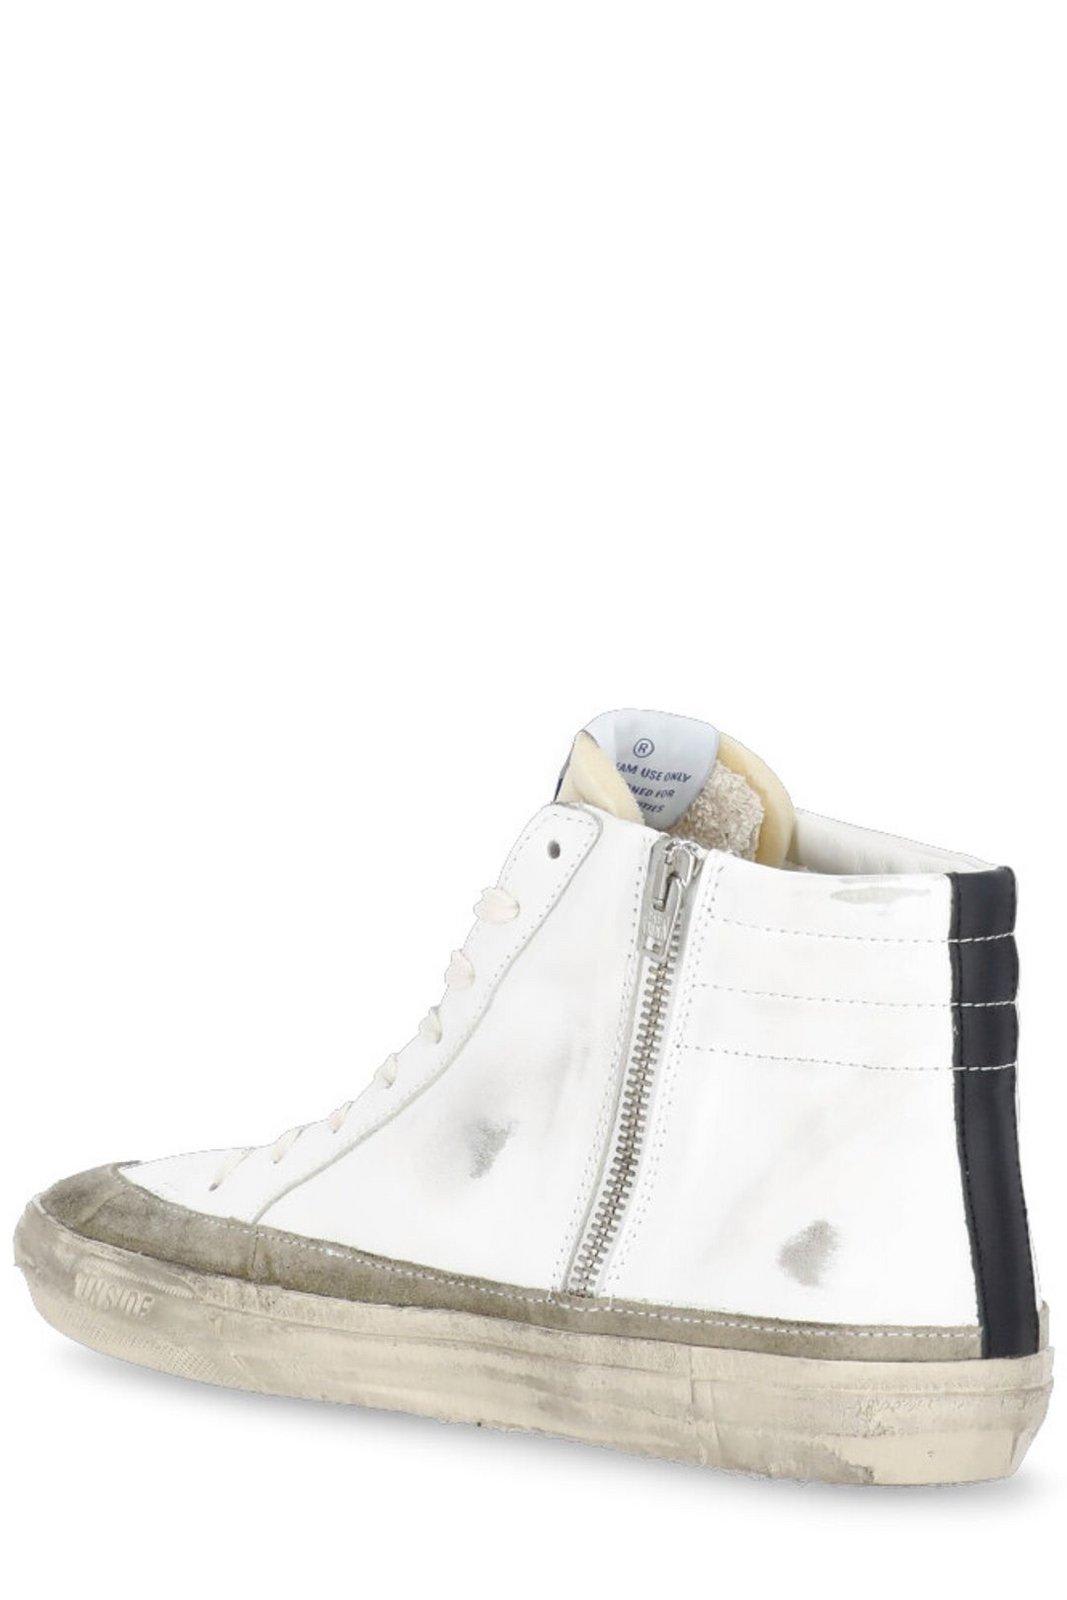 Goose White Slide High-top Sneakers In White Yellow Black |